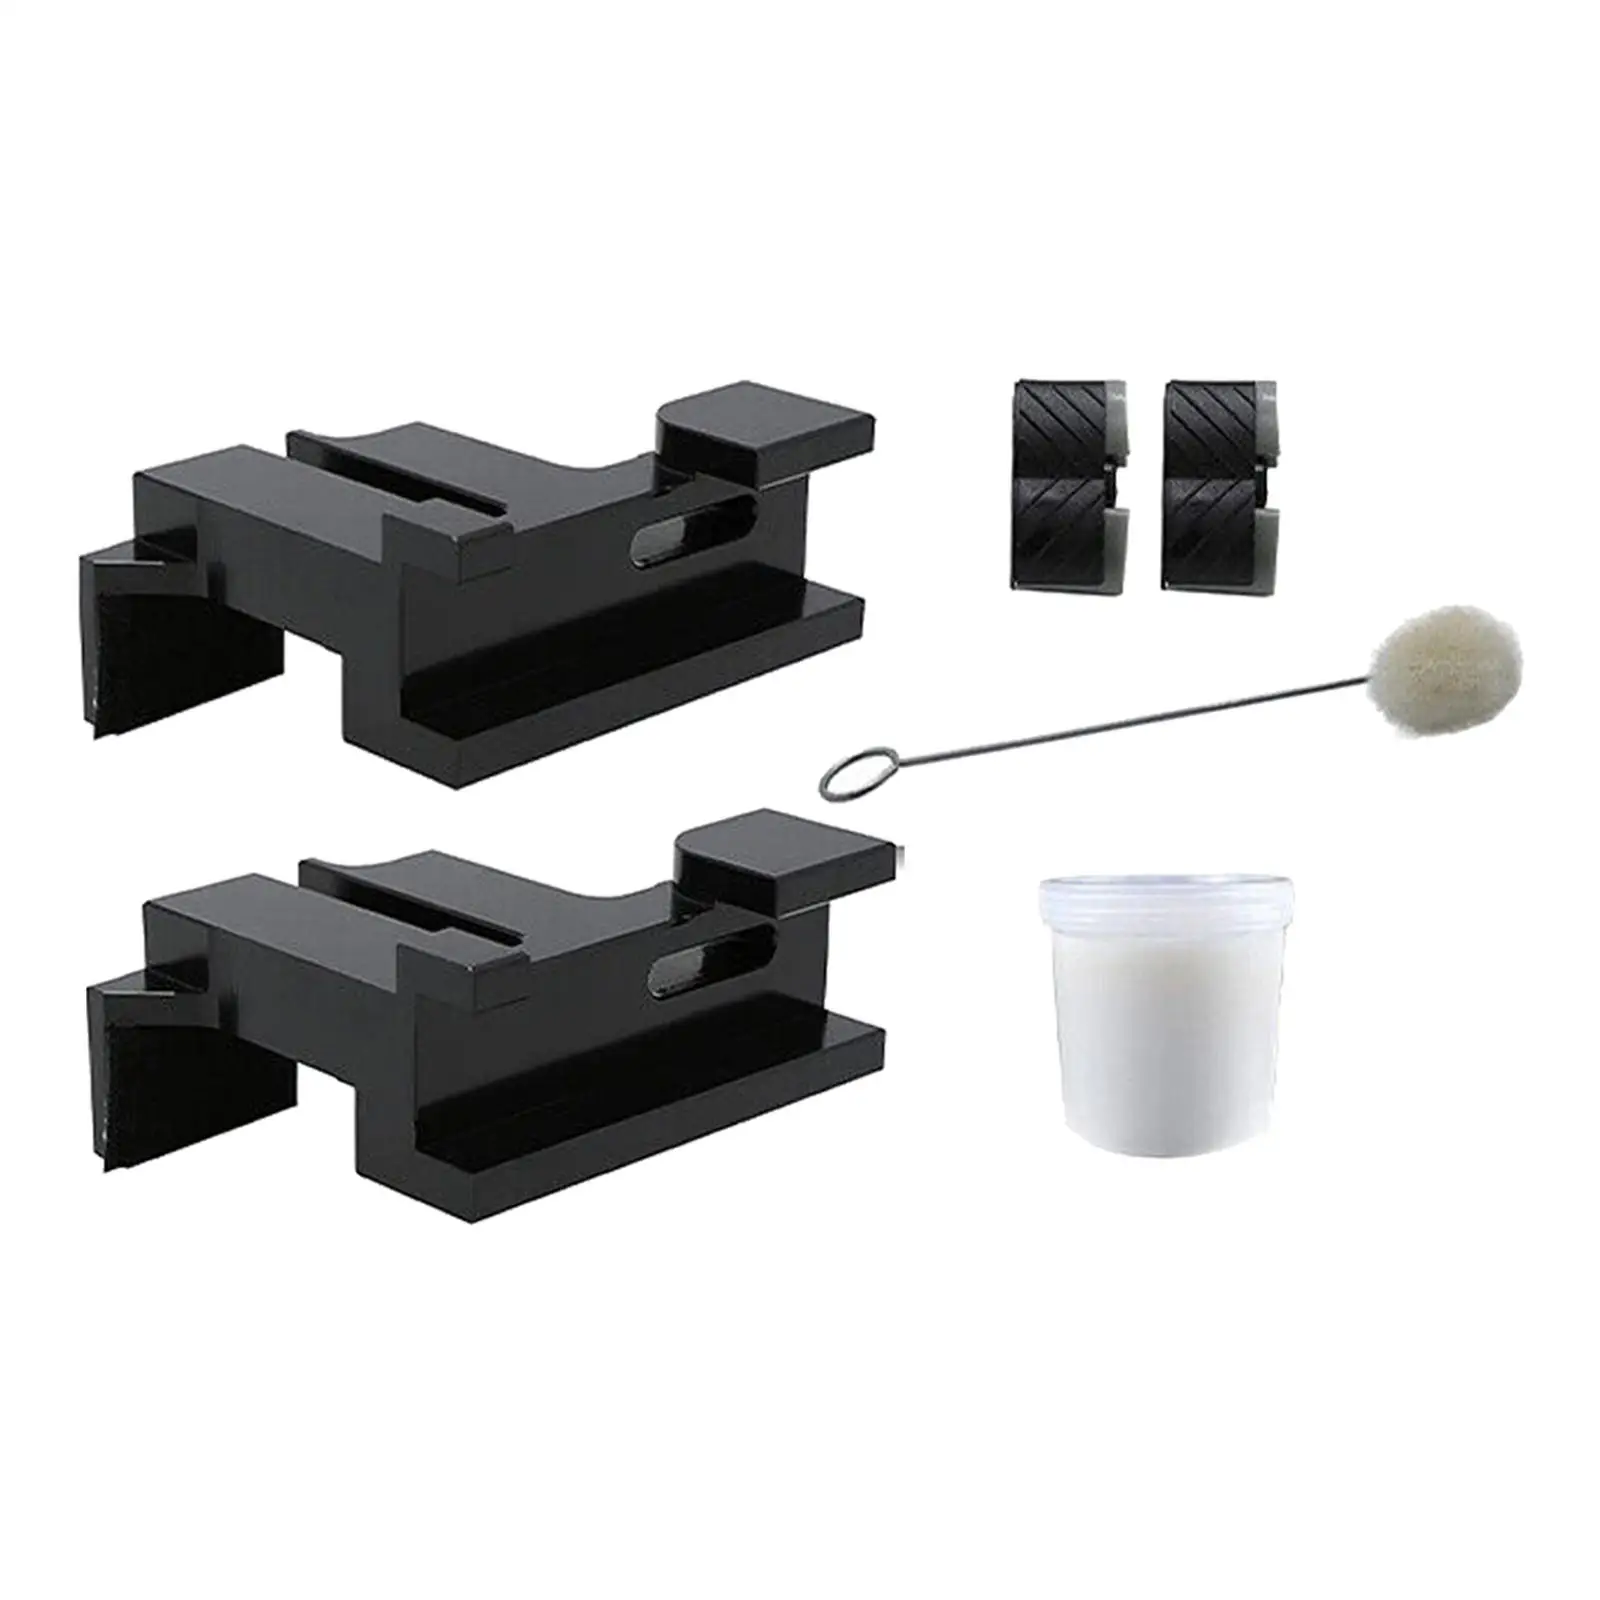 Sunroof Track Repair Set Spare Parts Professional,Durable, High Performance